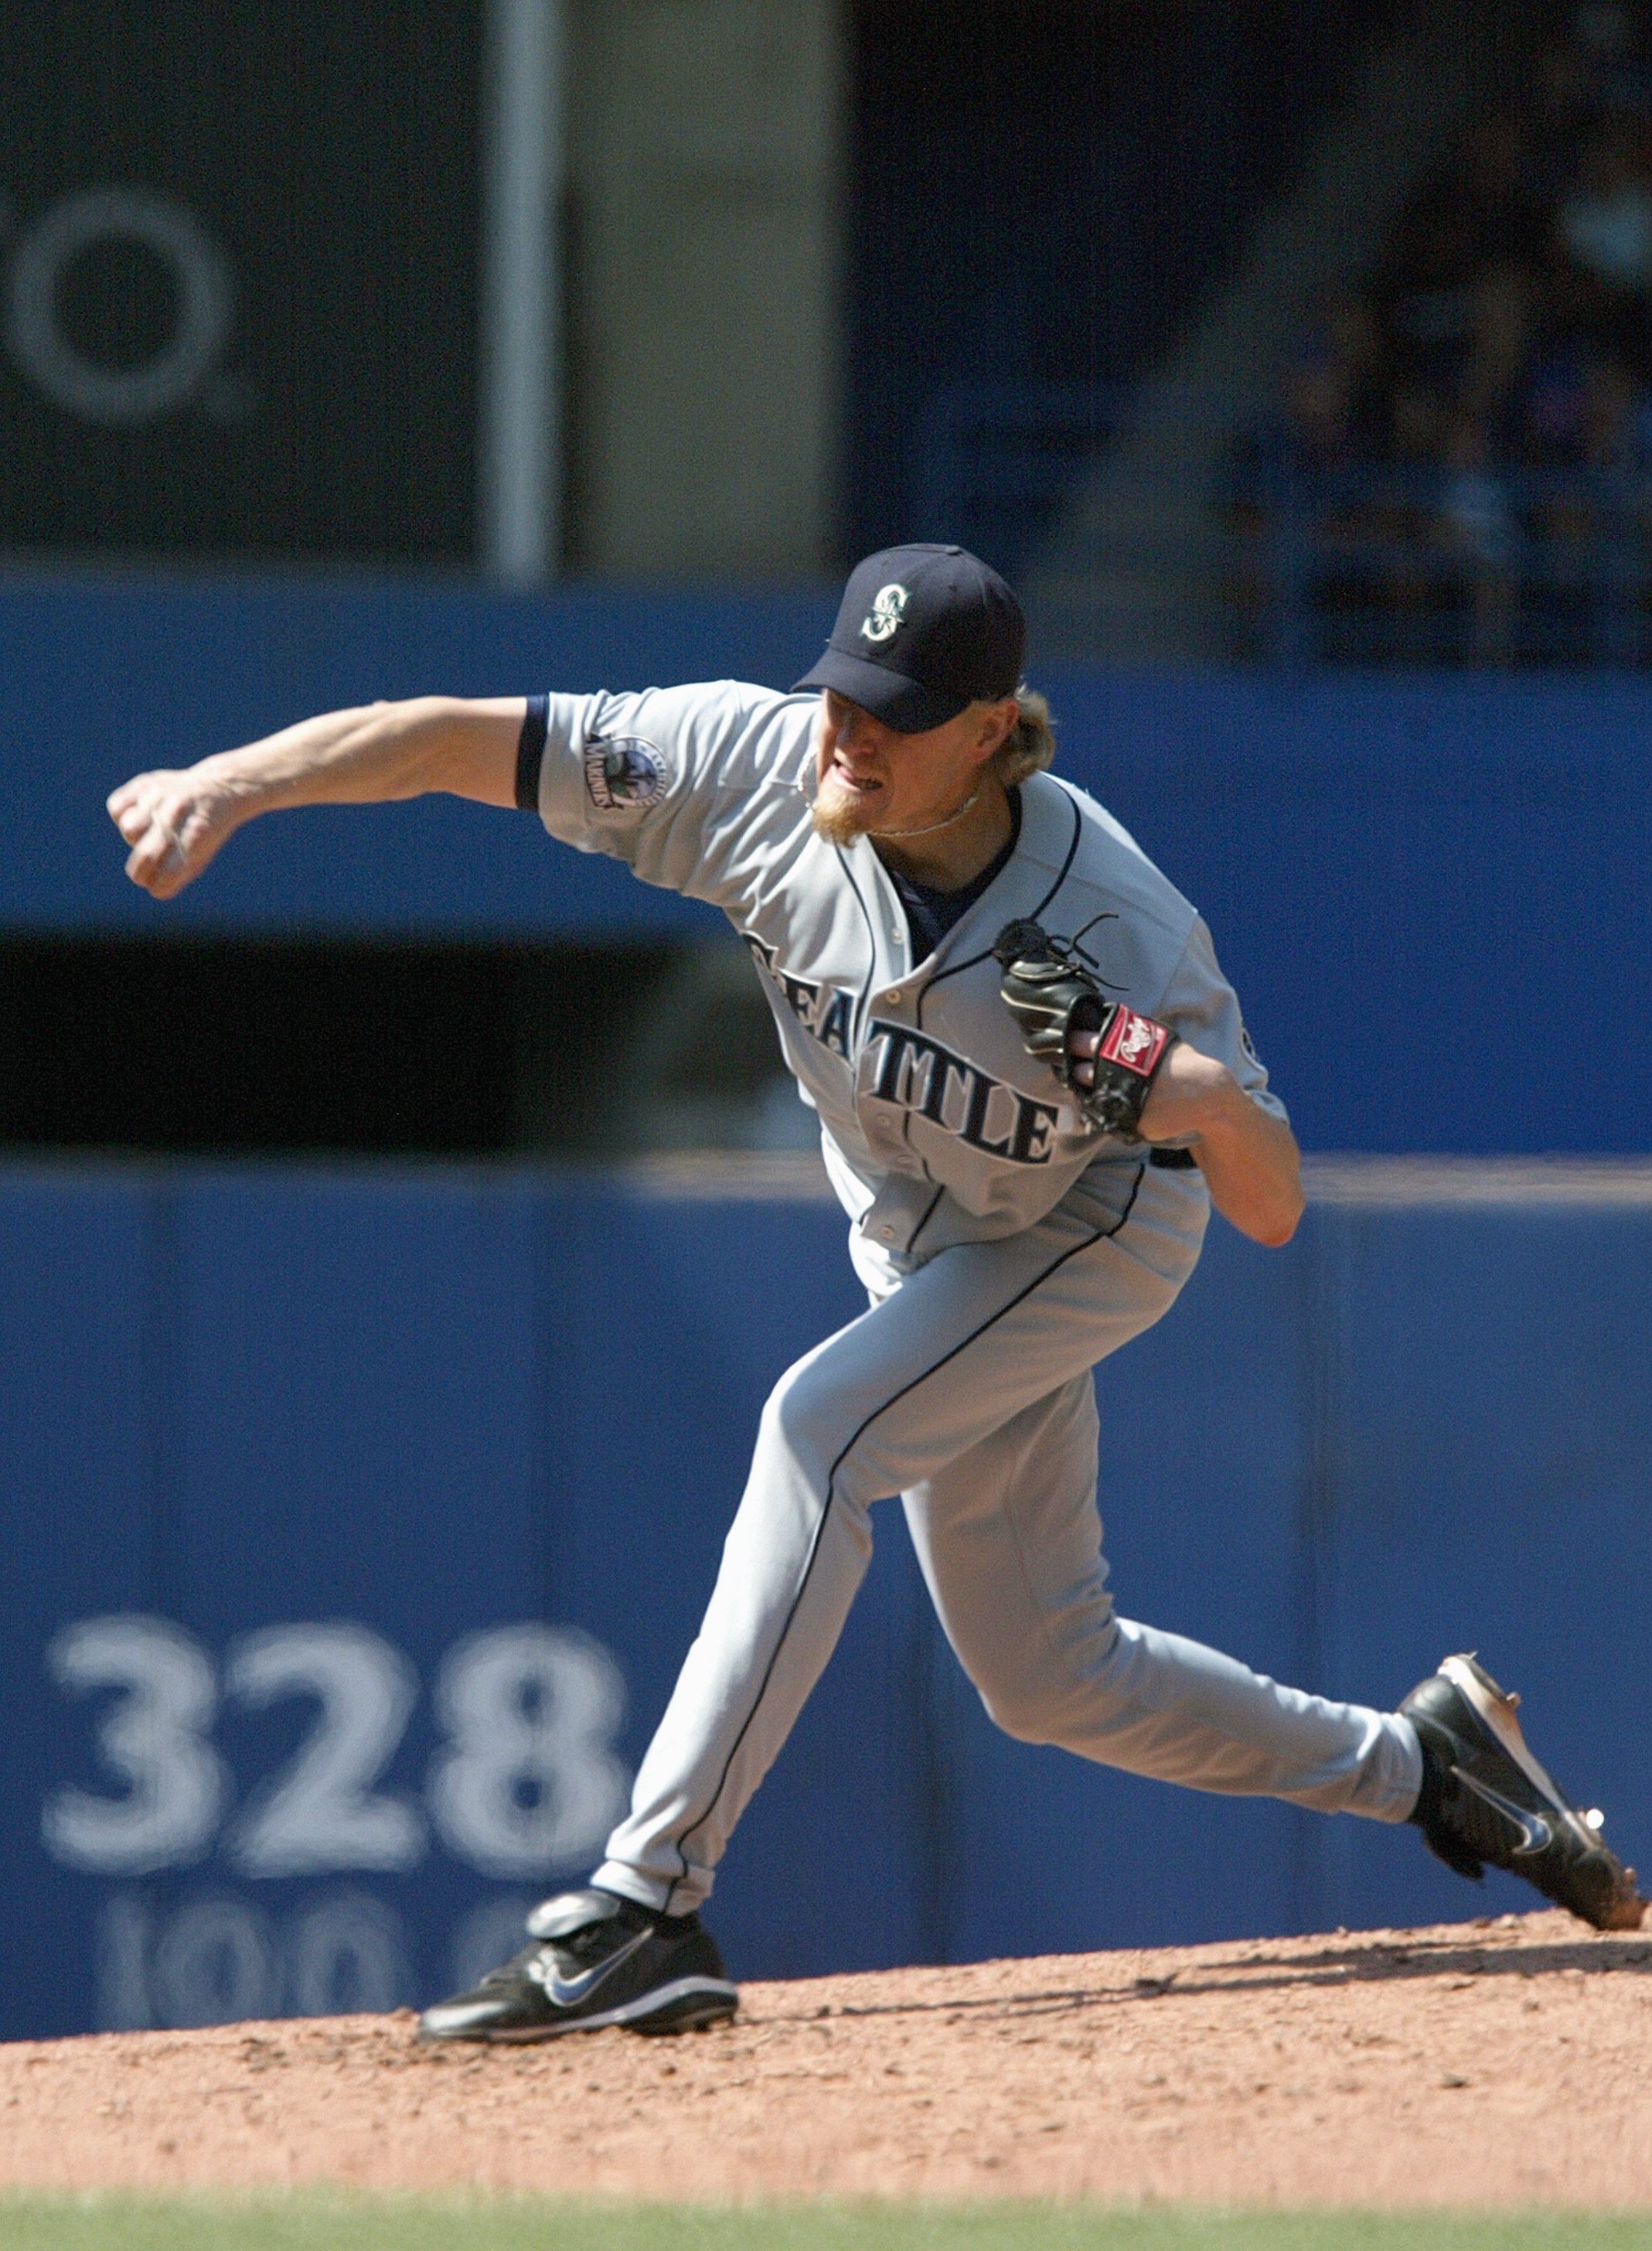 TORONTO - SEPTEMBER 2: Jeff Weaver #36 of the Seattle Mariners delivers the pitch against the Toronto Blue Jays at the Rogers Centre September 2, 2007 in Toronto, Ontario.(Photo By Dave Sandford/Getty Images)